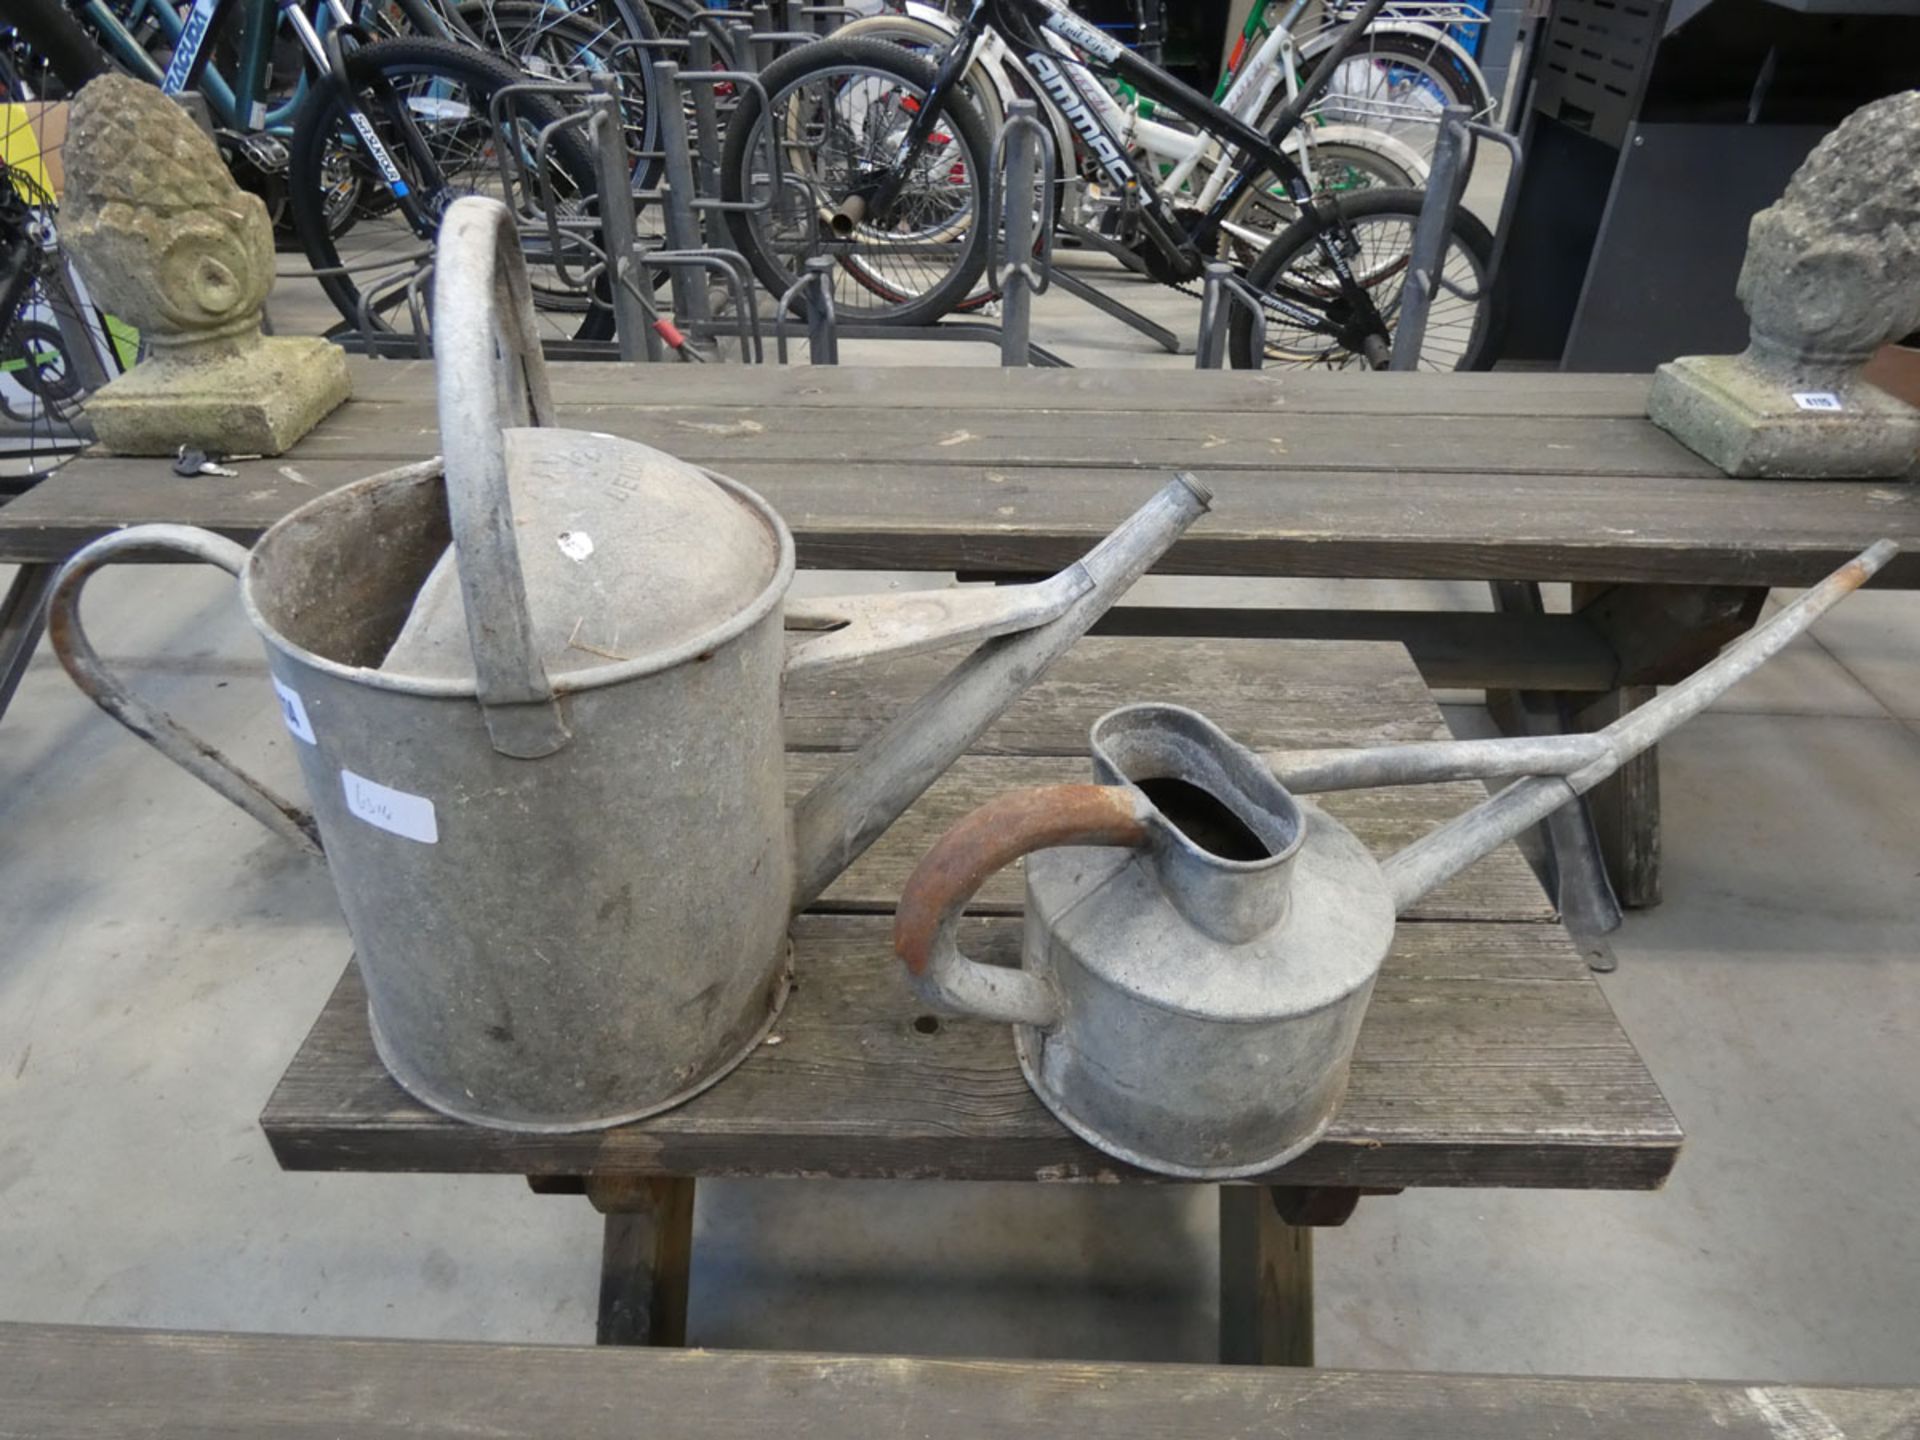 2 galvanized watering cans